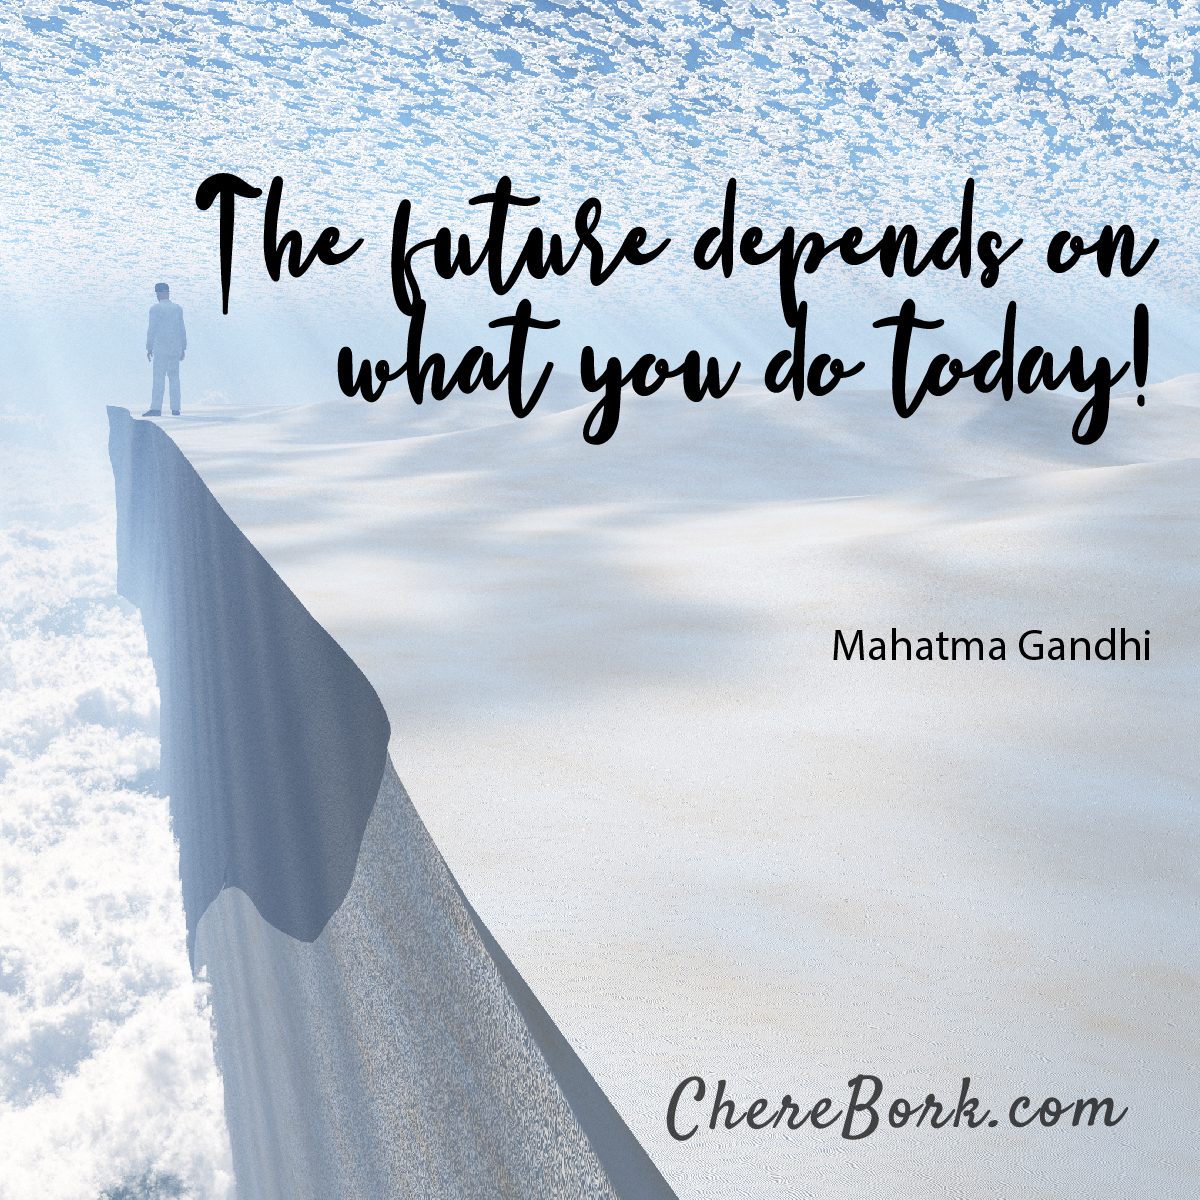 The future depends on what you do today! -Mahatma Gandhi